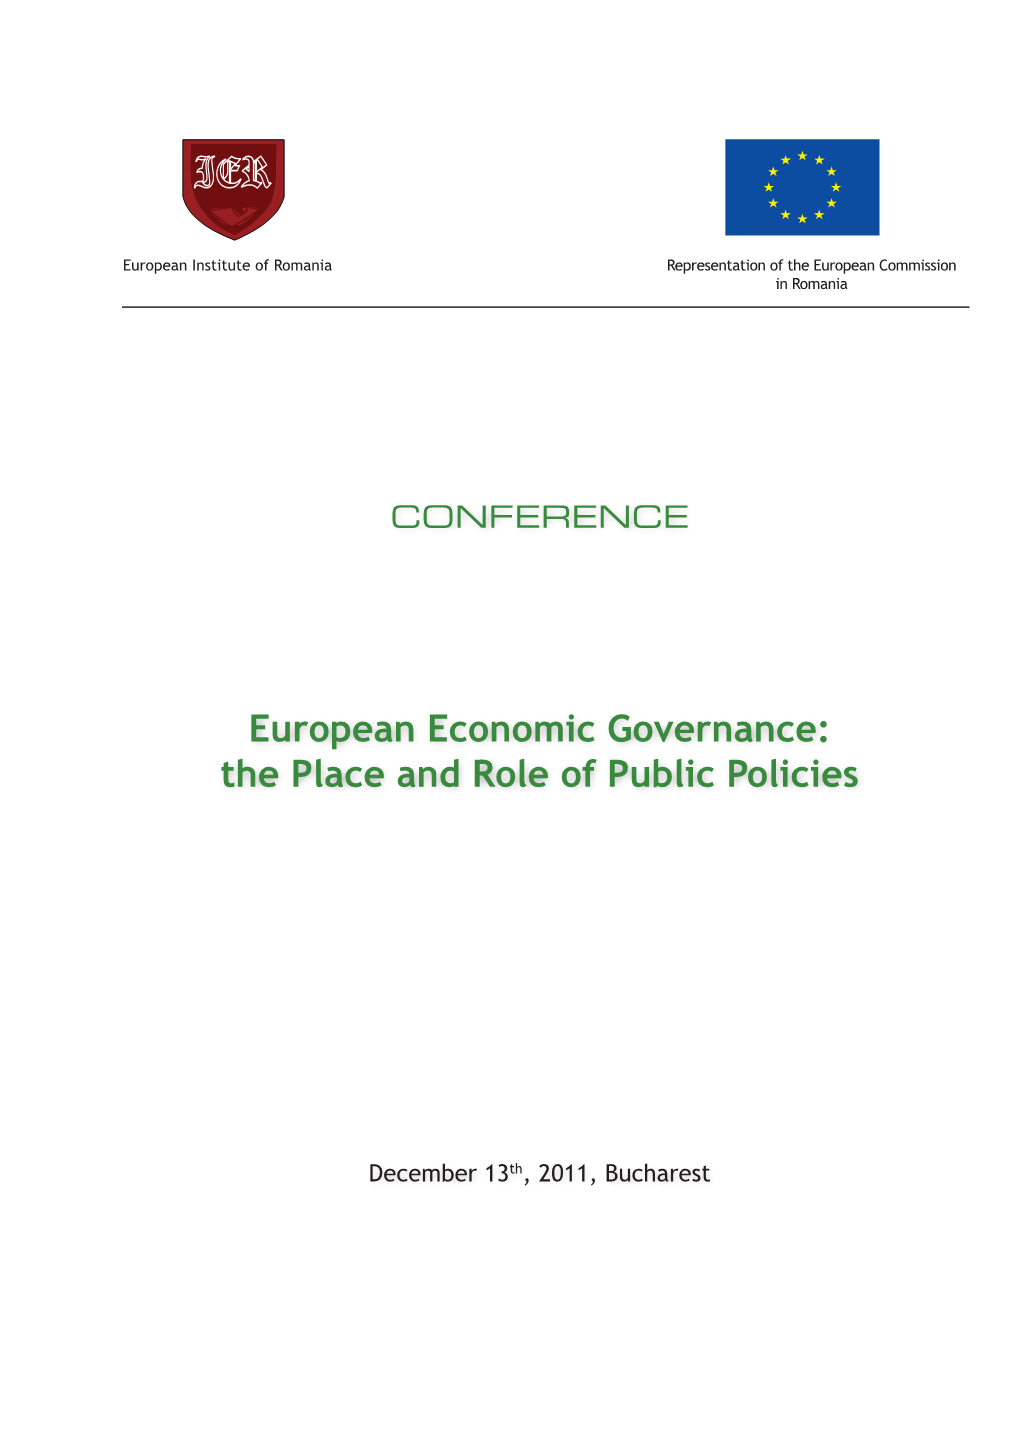 European Economic Governance: the Place and Role of Public Policies